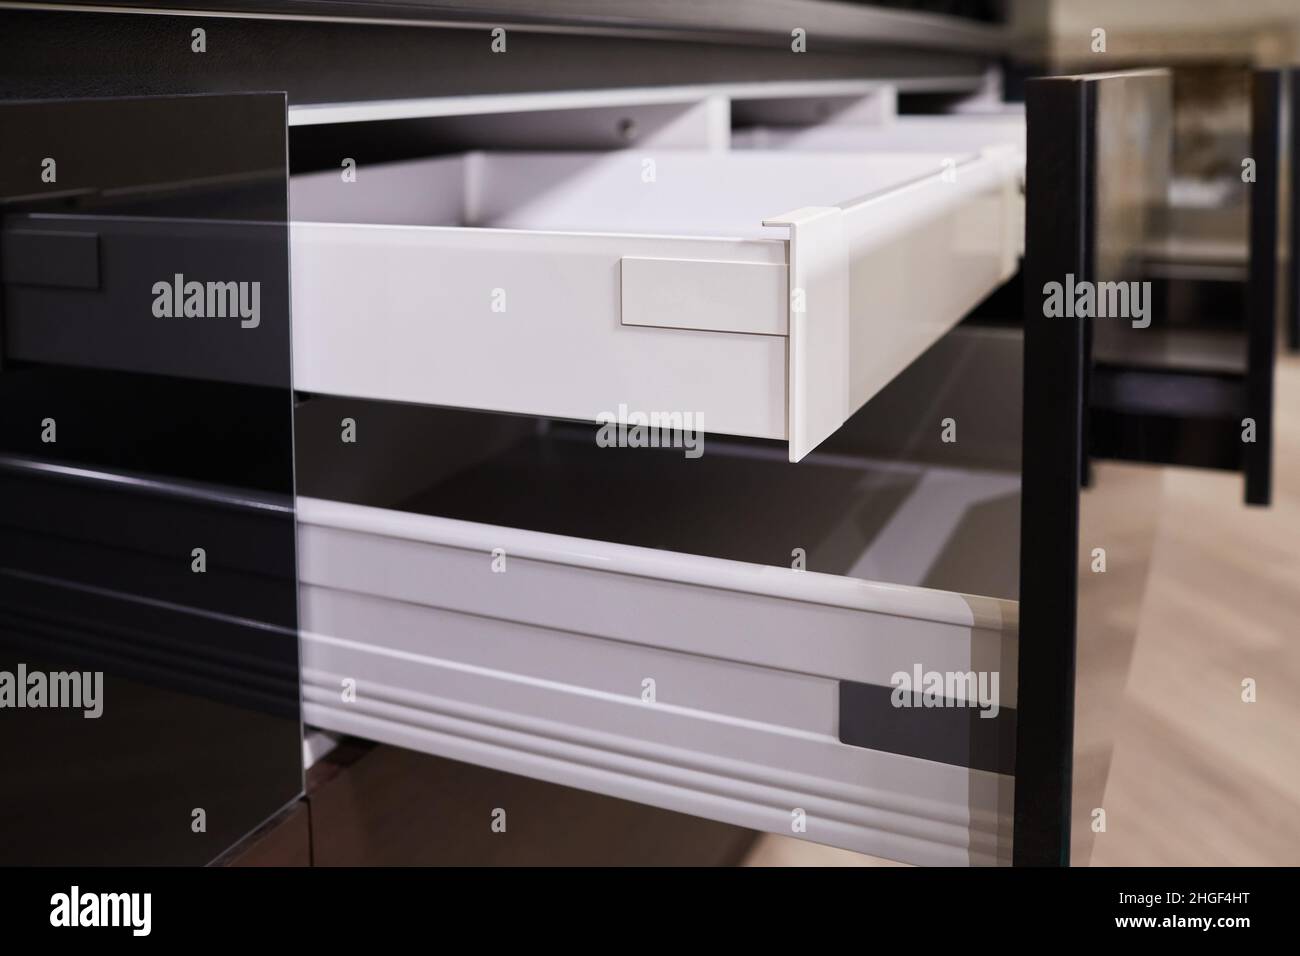 Modern kitchen with open cutlery drawer inserts. Stock Photo